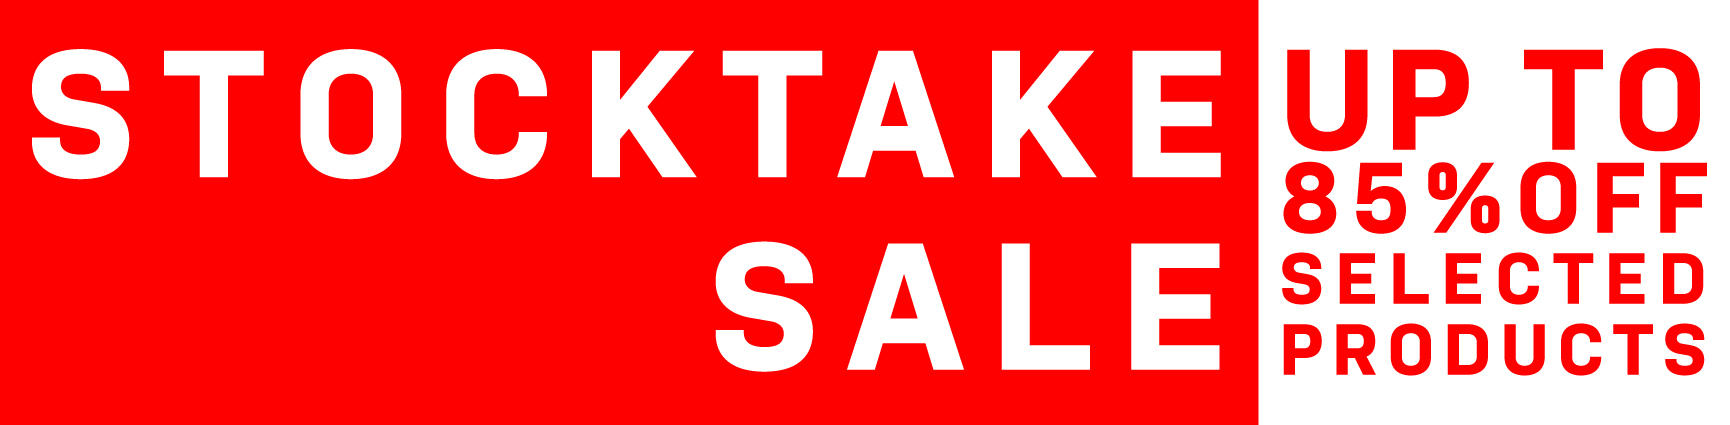 Stocktake Sale Up to 85% Off